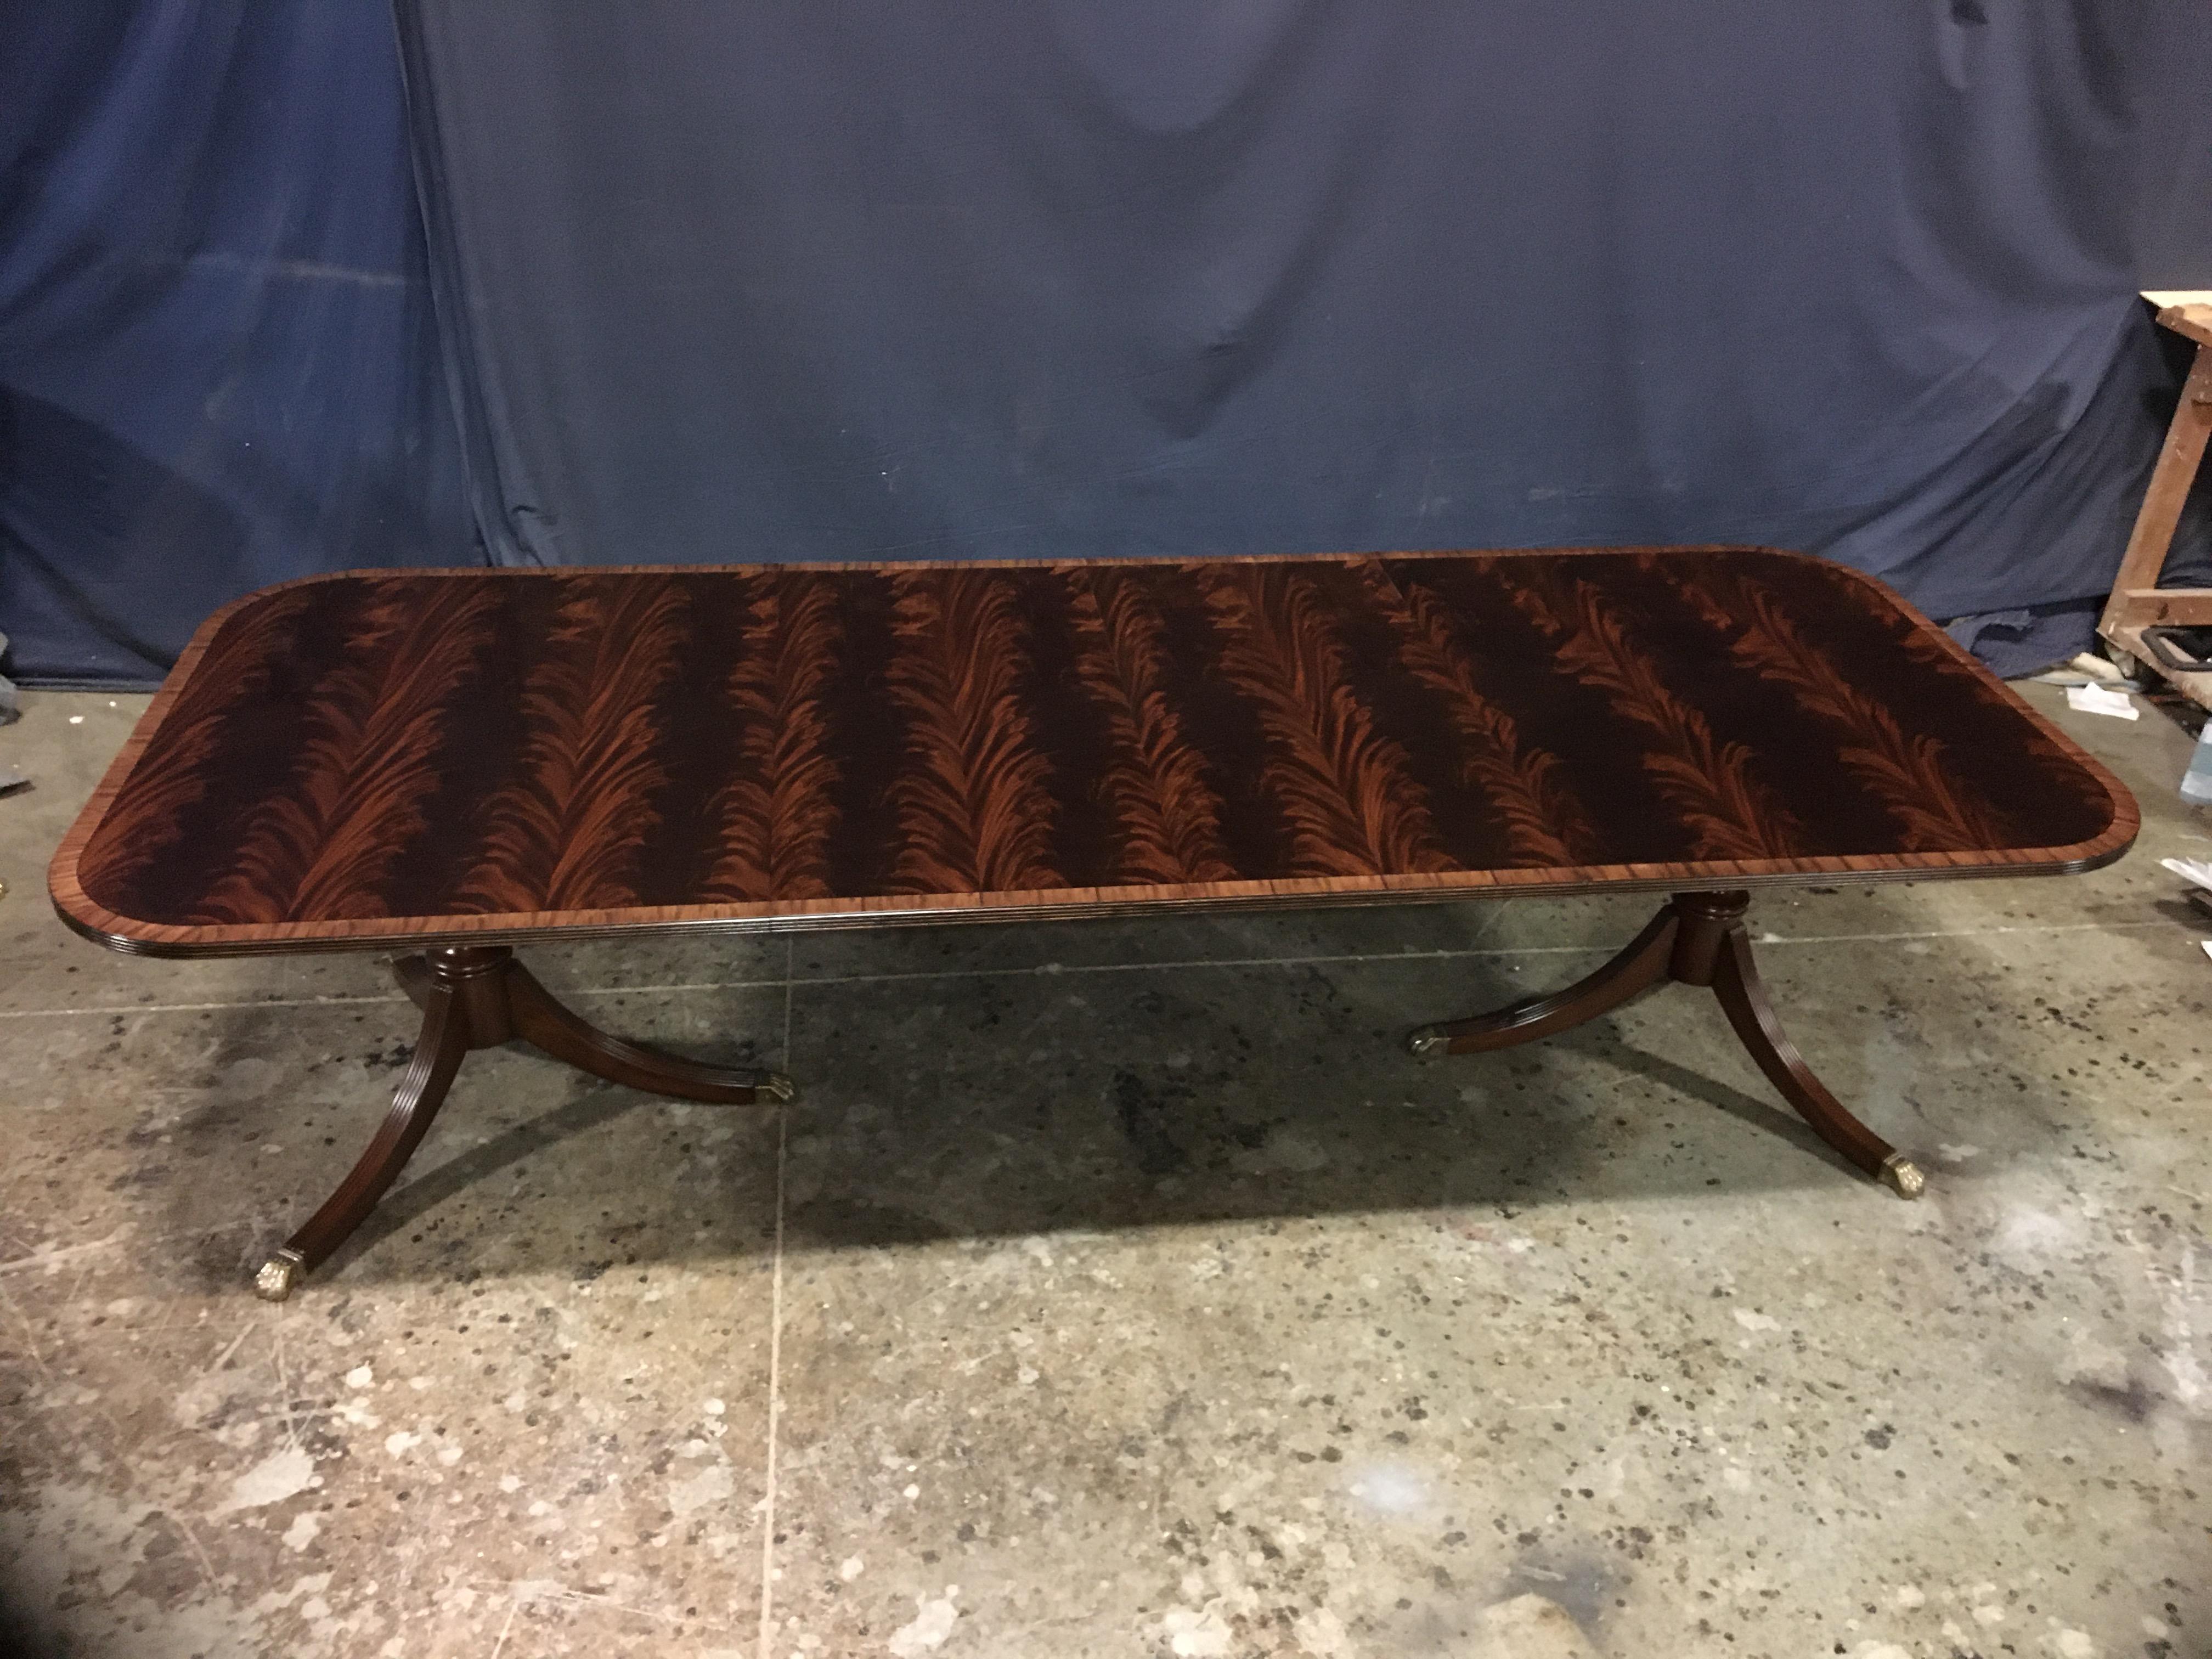 This is a made to order traditional mahogany dining table made in the Leighton Hall shop. It features a field of slip-matched swirly crotch mahogany from West Africa. It has a satinwood border and a three beaded edge. It has a hand rubbed and